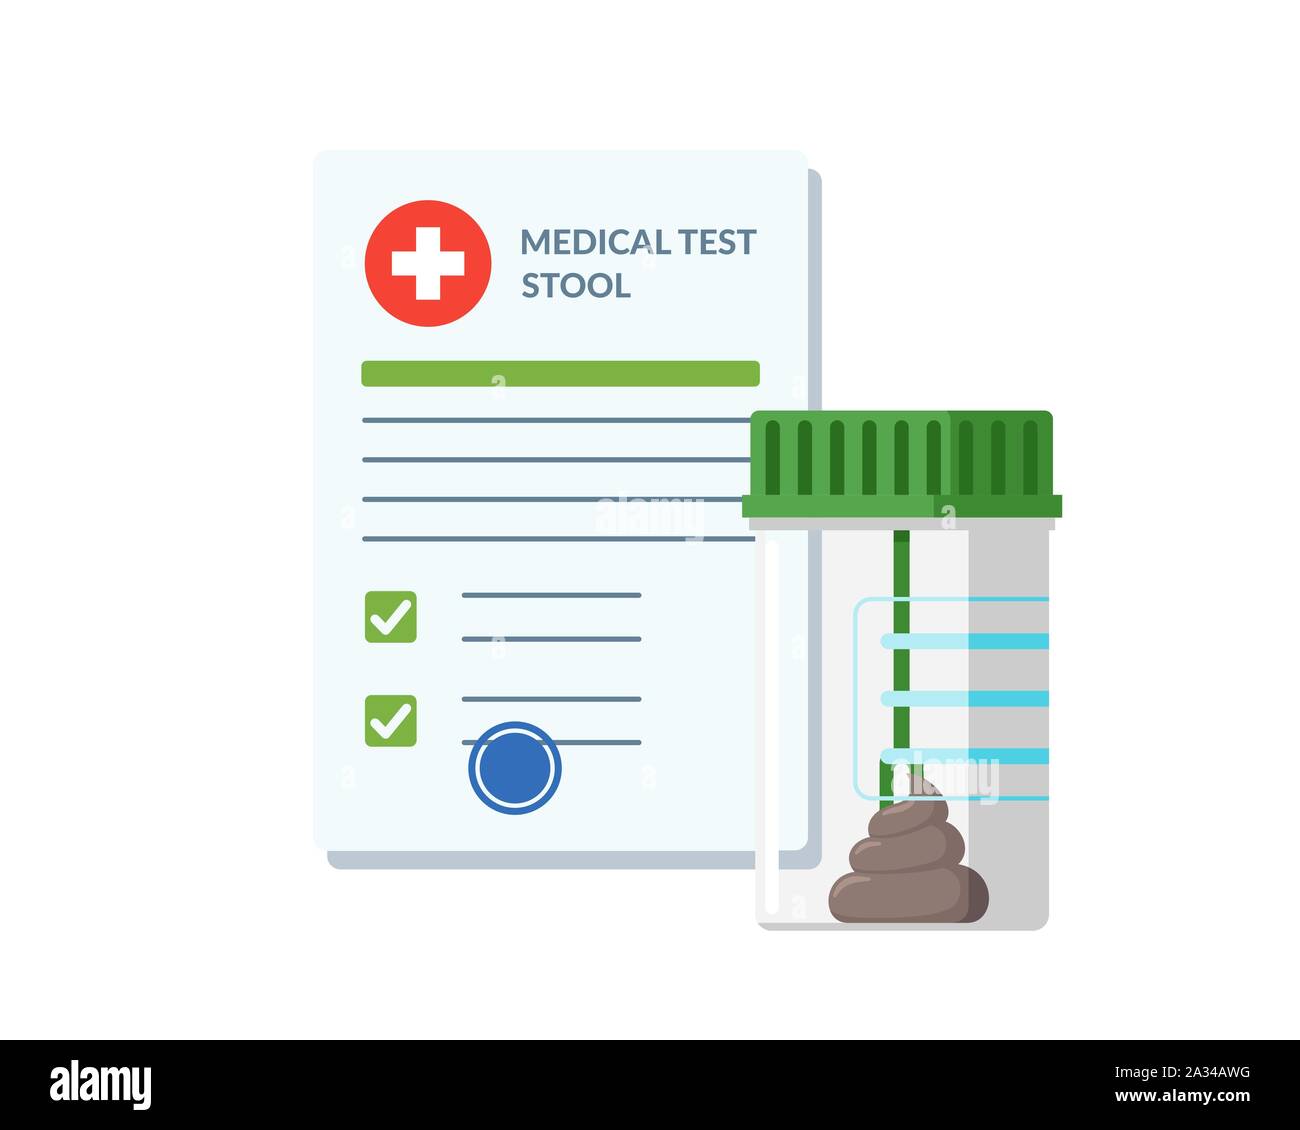 Plastic jar stool feces test analysis and medical lab blank form list with results data and approved check mark vector illustration. Clinical checklist document. Insurance medicine examination concept Stock Vector